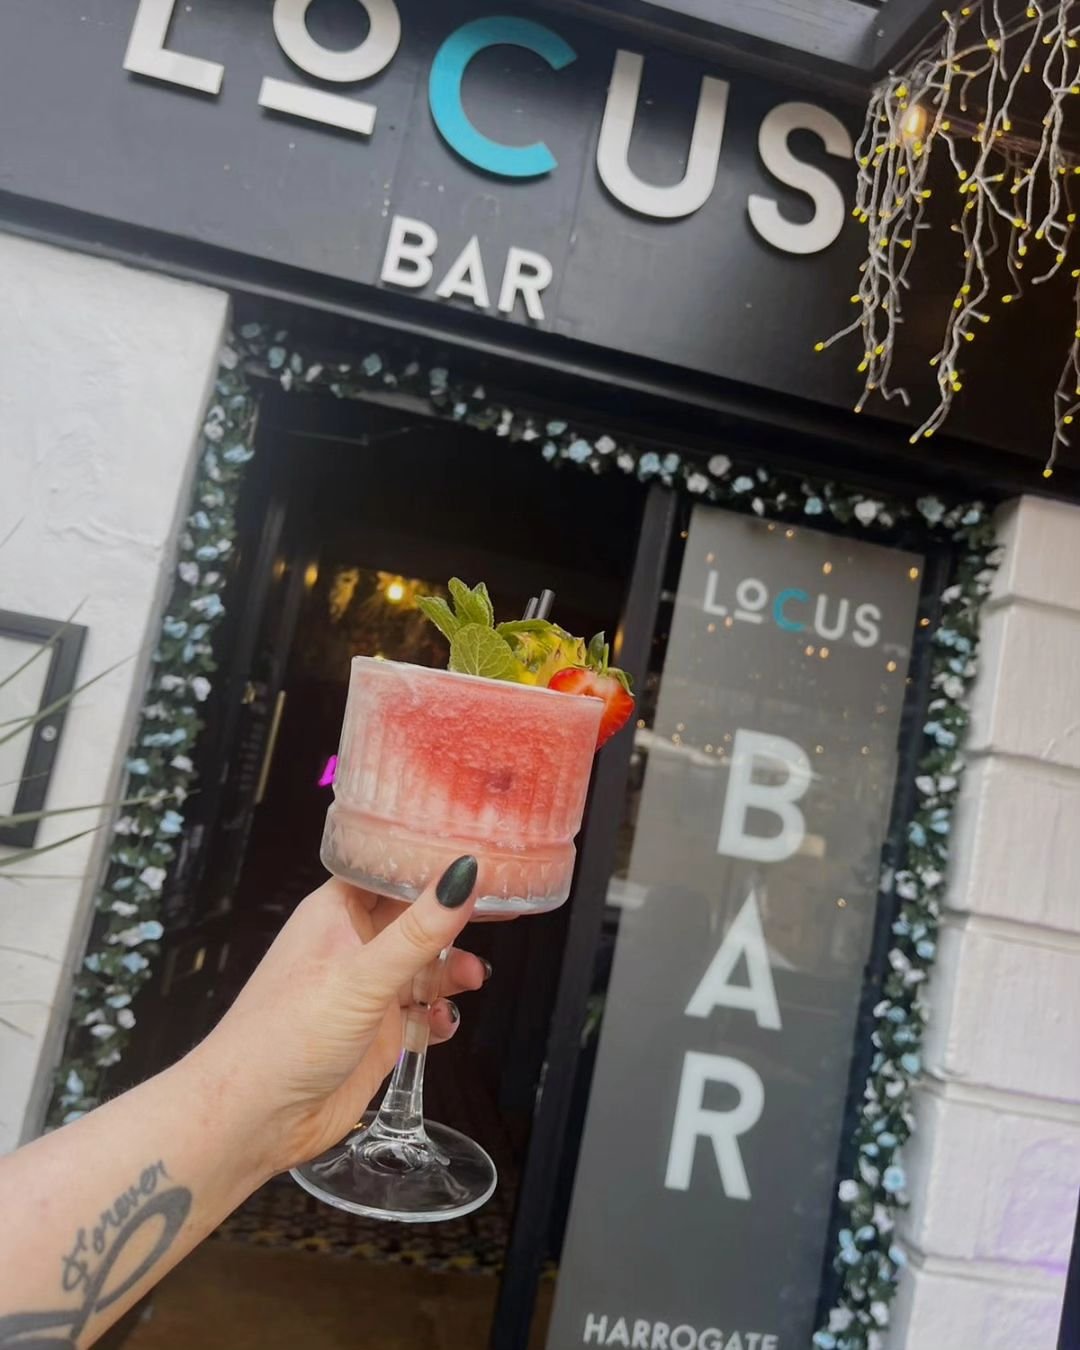 GIANT MIAMI VICE🍍🍓

Available on this week's special board!!

&bull;

1/2 pina colada 
1/2 strawberry daiquiri 

What more could you want..

&bull;

Open till 1 am&hearts;️

#locusbarharrogate #harrogatemusicscene #cocktailspecial #cocktailbar #har